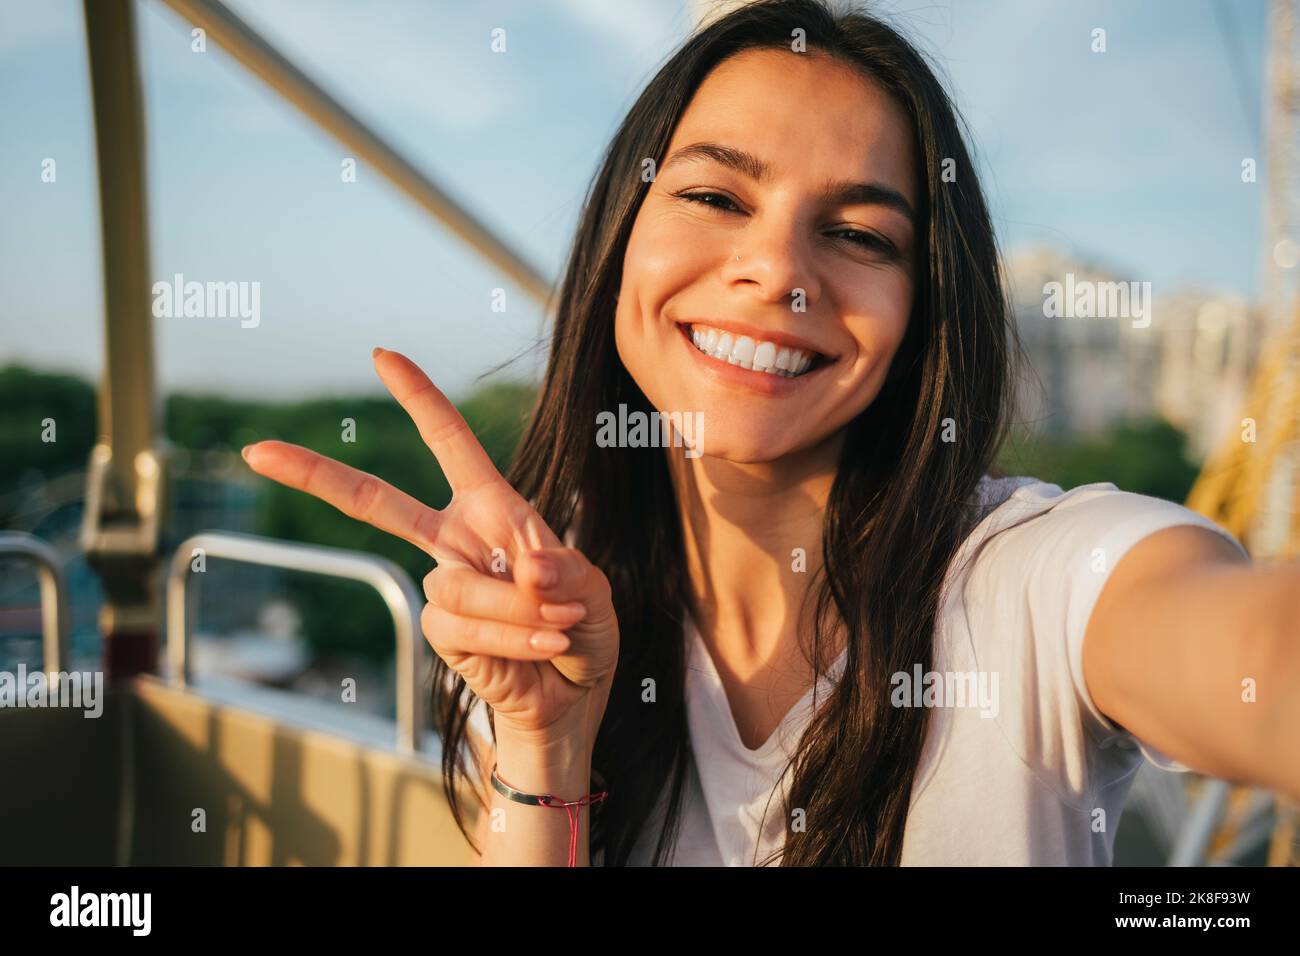 Happy woman showing peace gesture and taking selfie in Ferris wheel Stock Photo